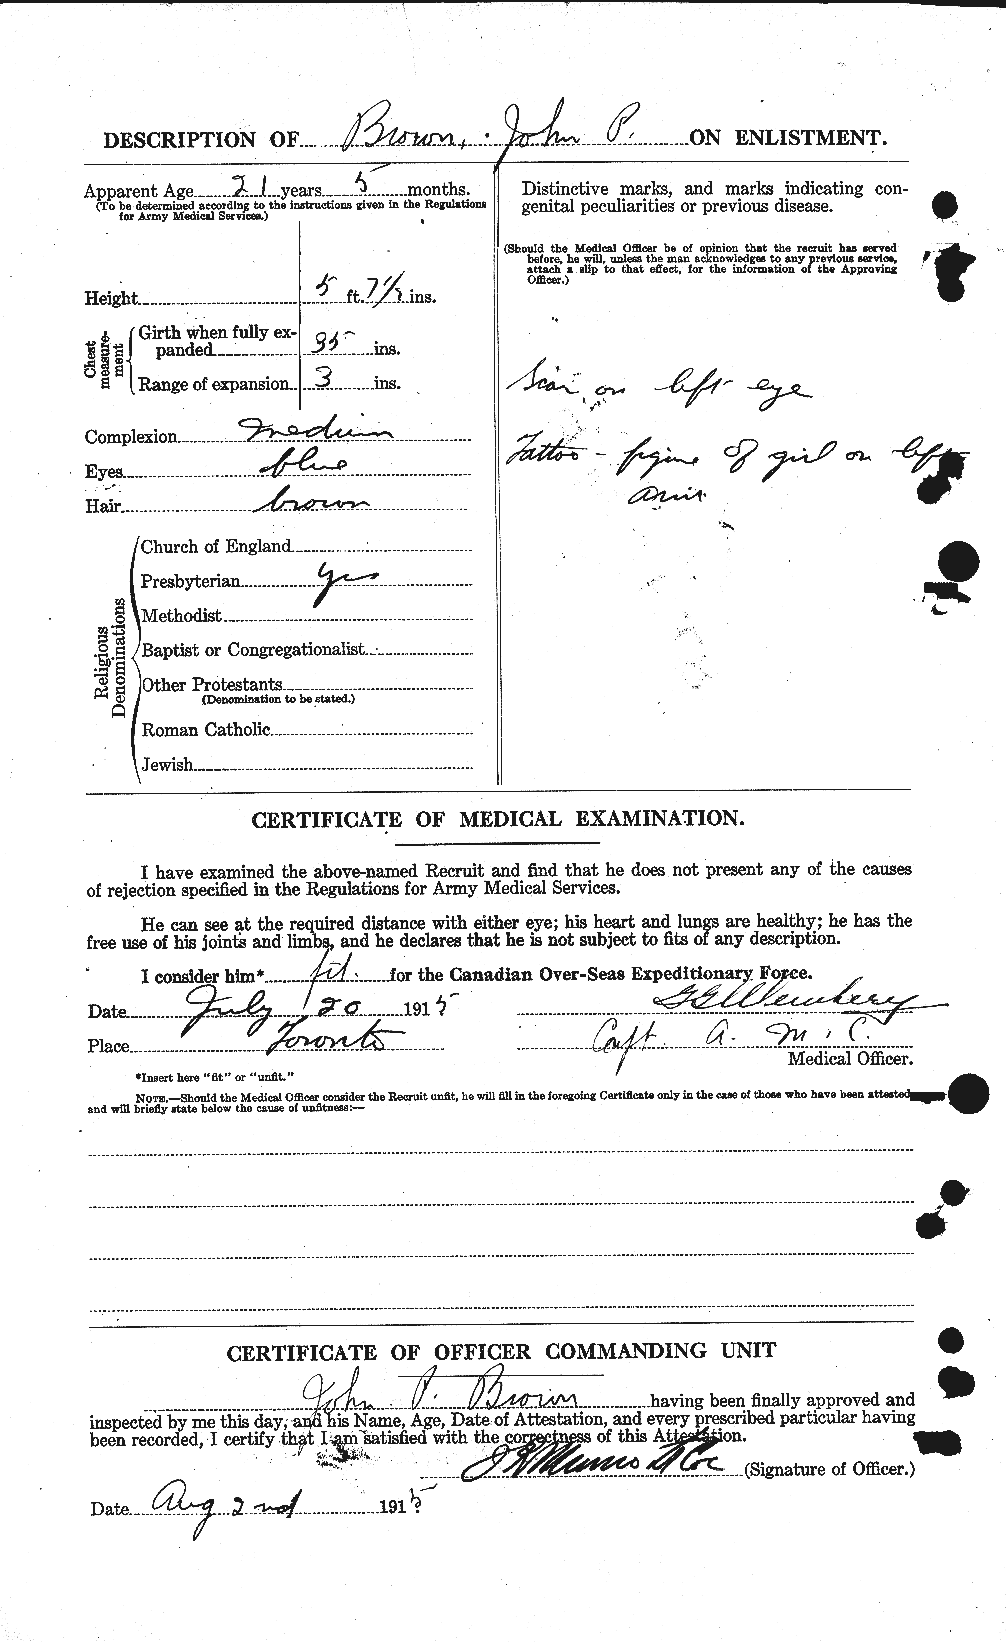 Personnel Records of the First World War - CEF 265849b